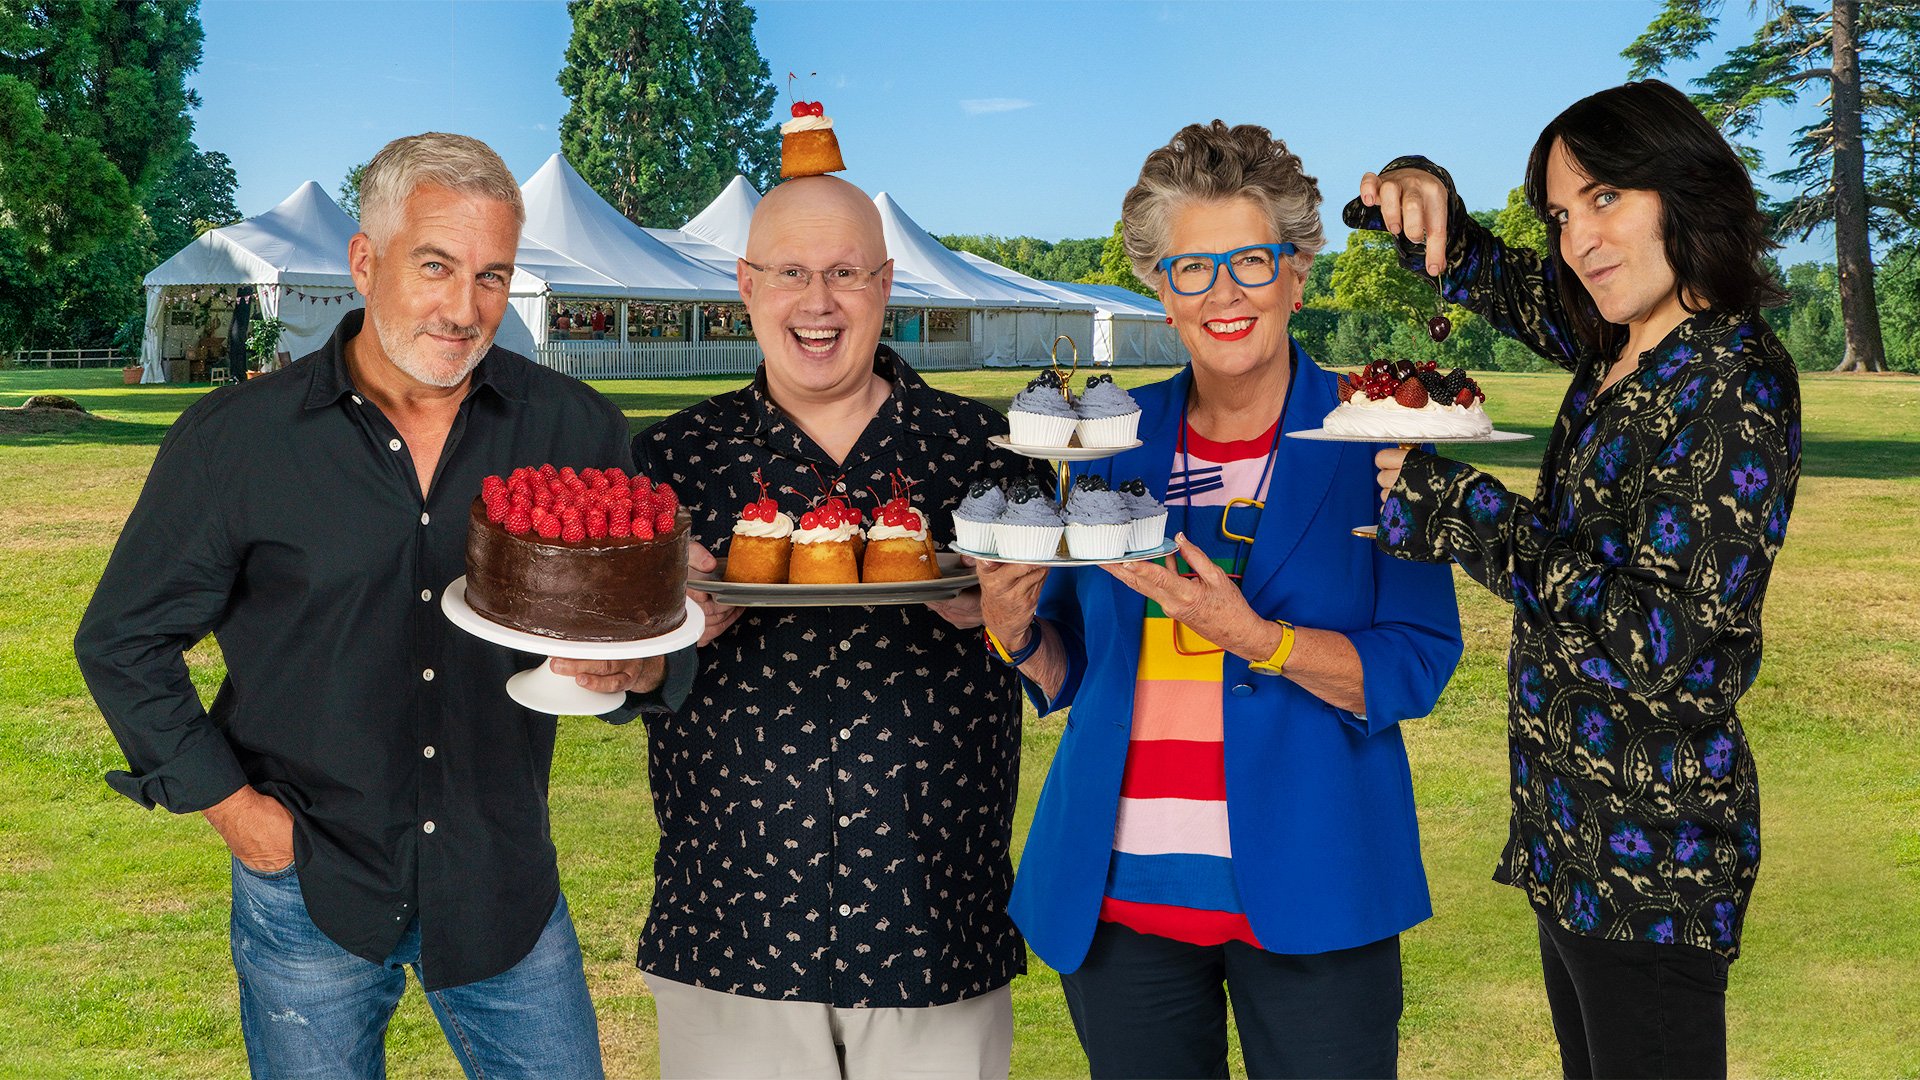 How to watch the season finale of The Great British Bake Off online